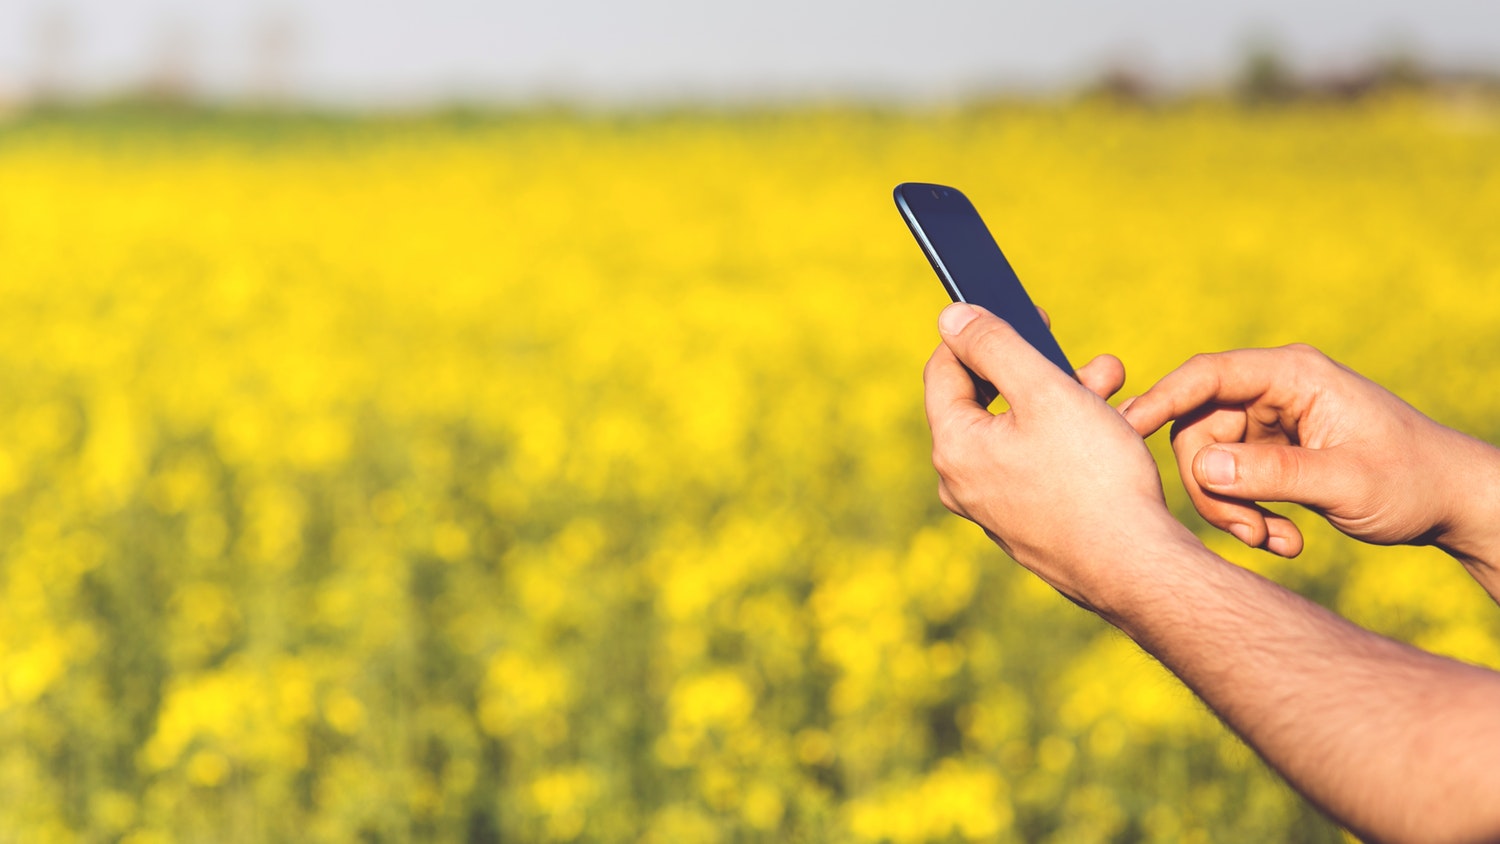 Hands holding a cellphone in a field